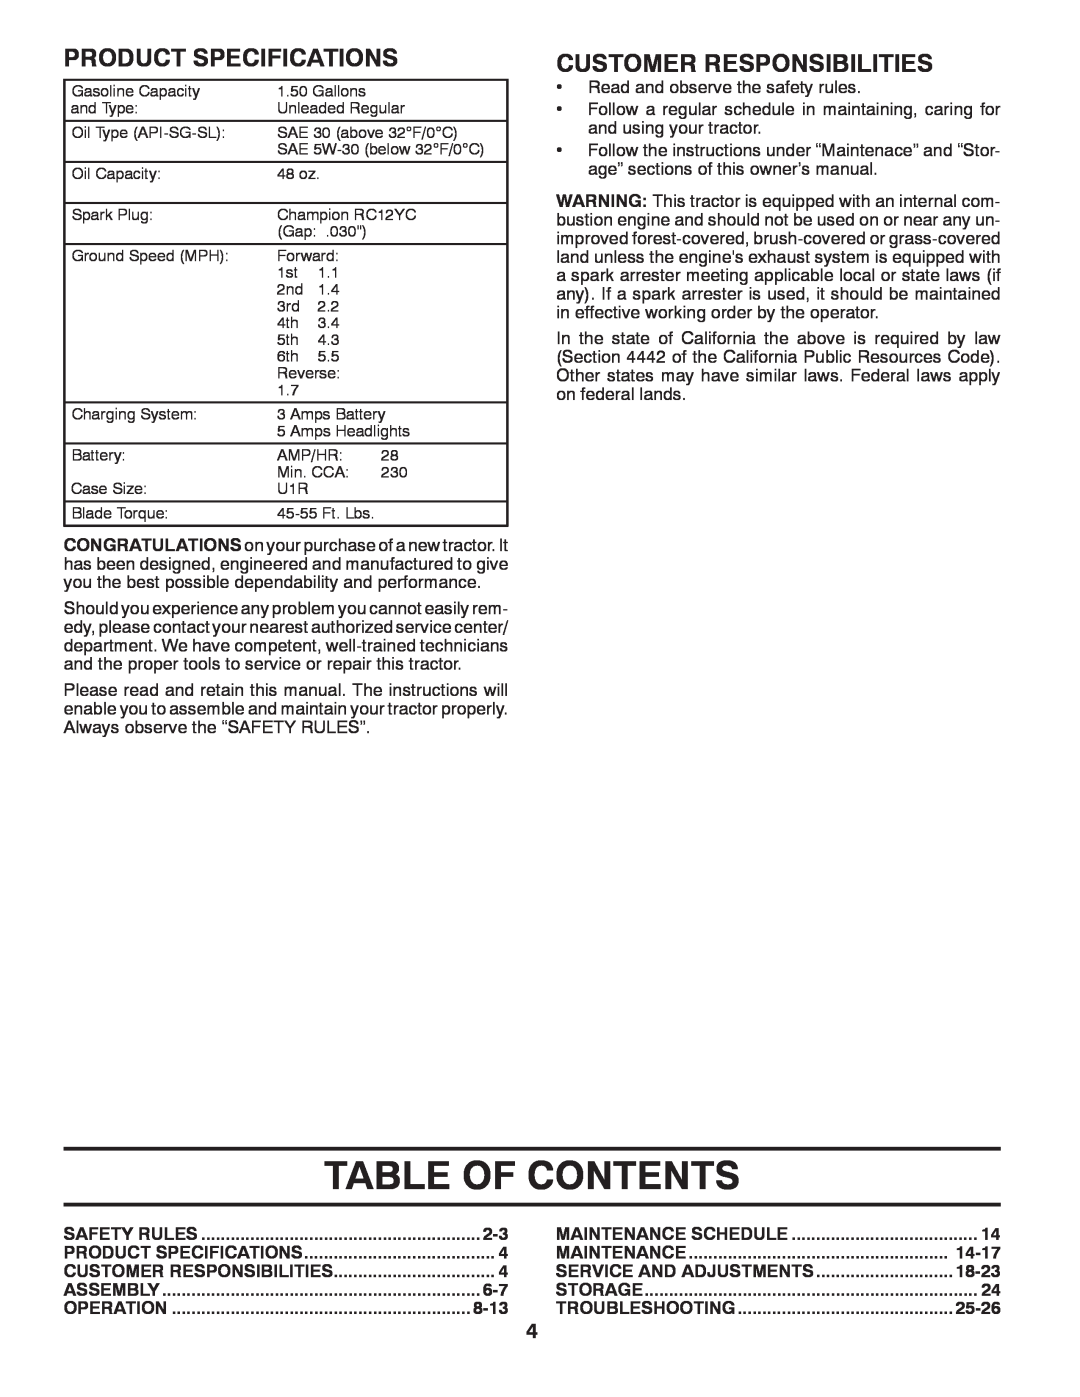 McCulloch 96041017600 Table Of Contents, Product Specifications, Customer Responsibilities, 8-13, 14-17, 18-23, 25-26 